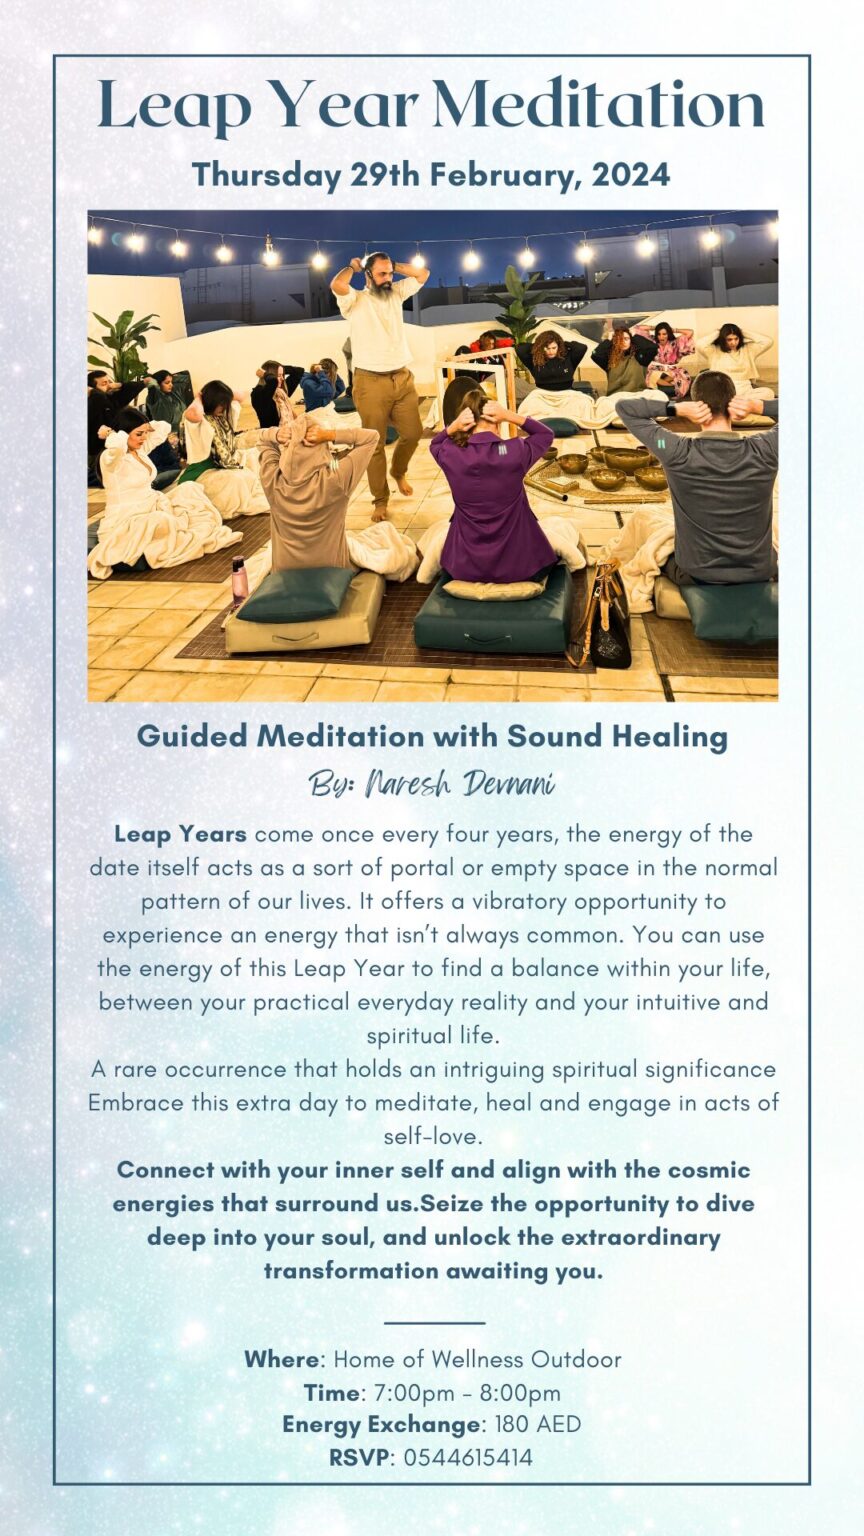 sound healing sessions